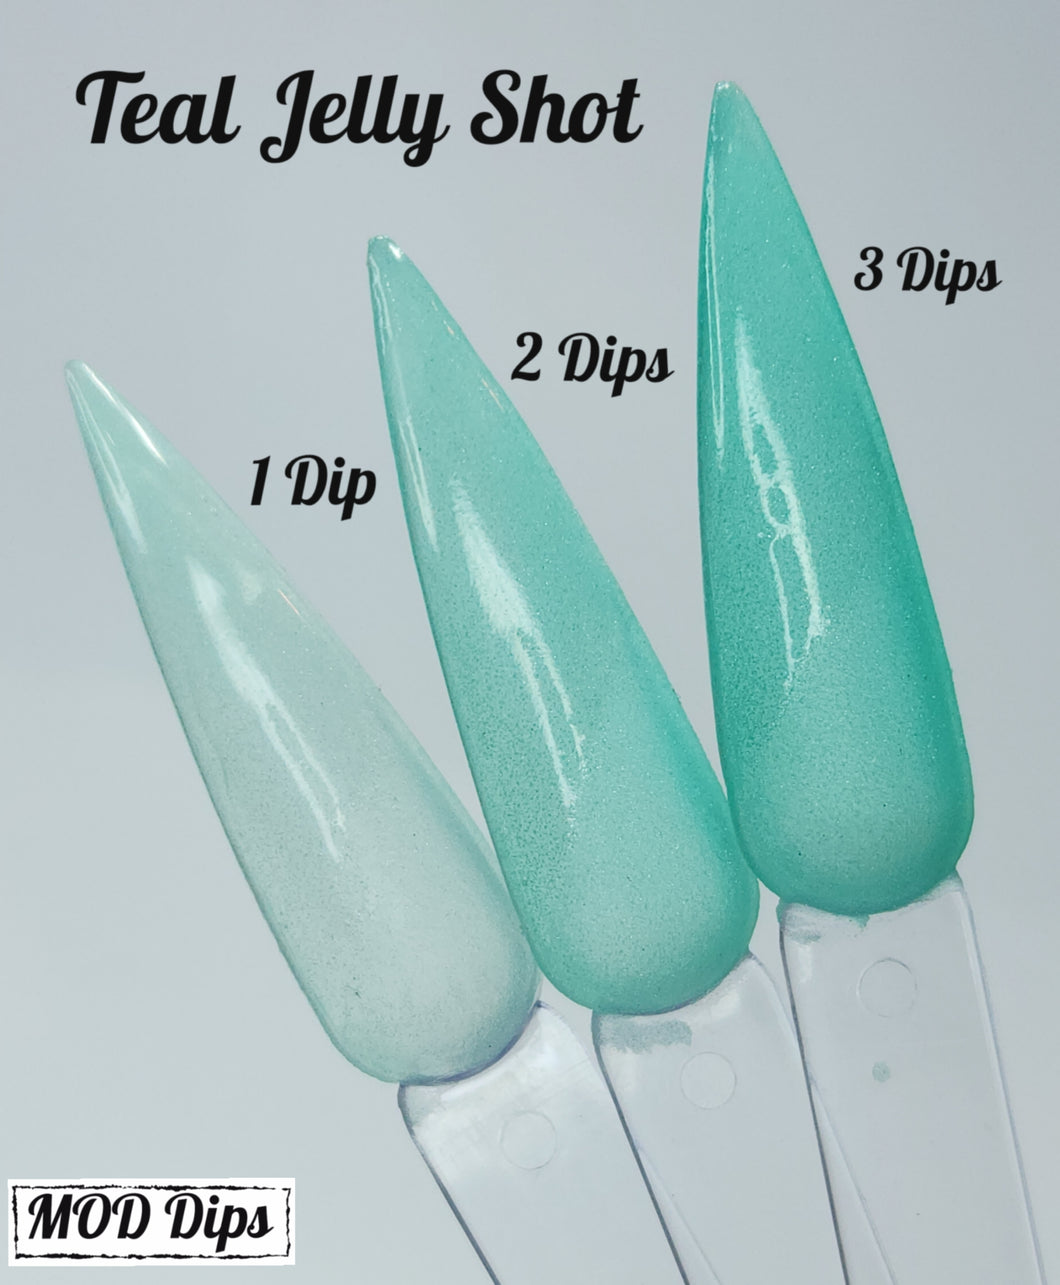 Teal Jelly Shot